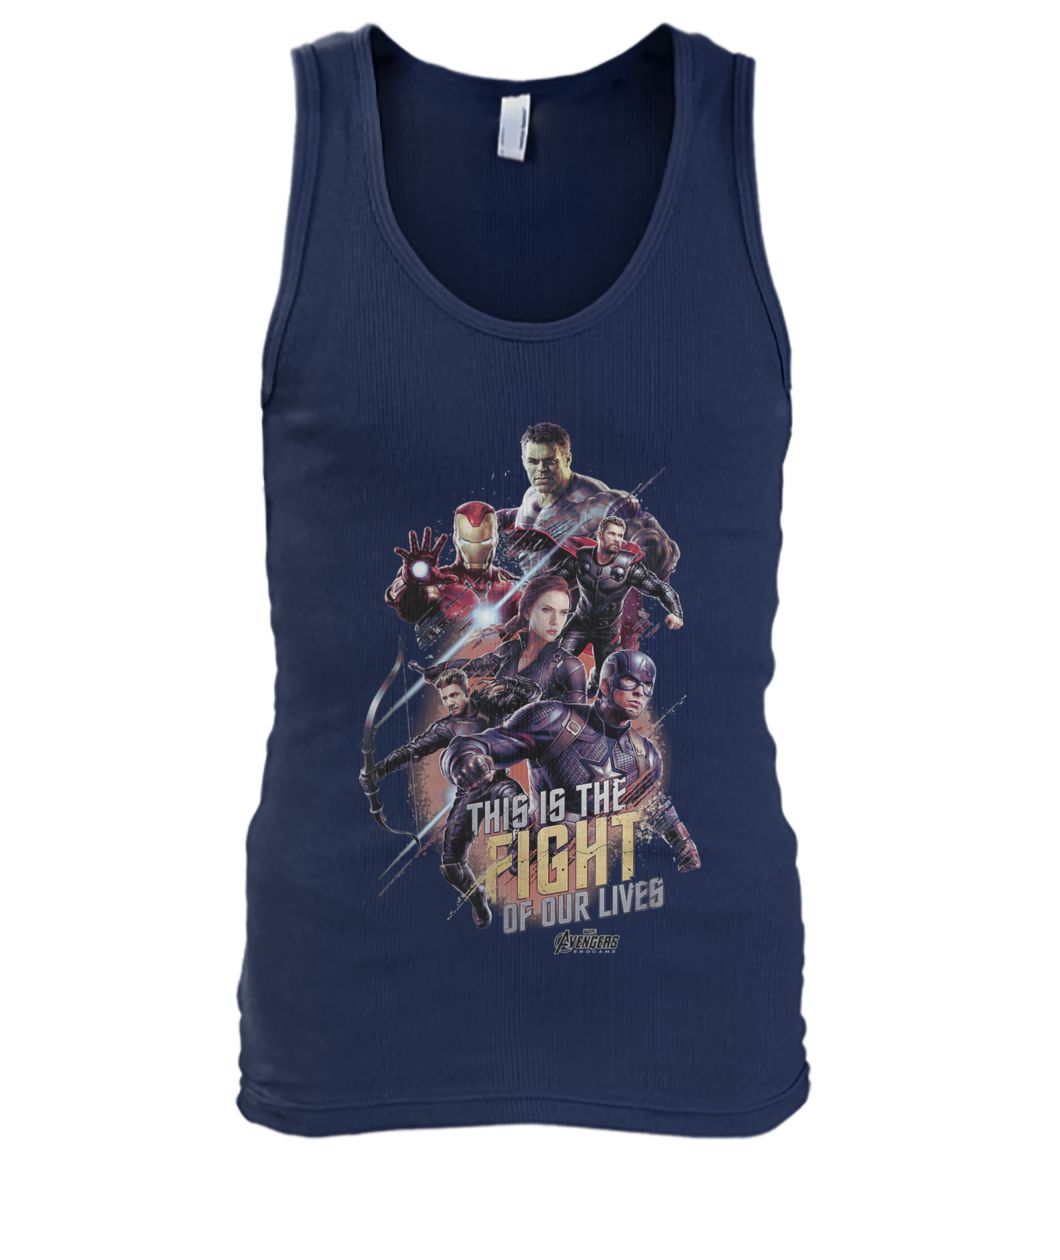 Marvel avengers endgame this is the fight of our lives men's tank top